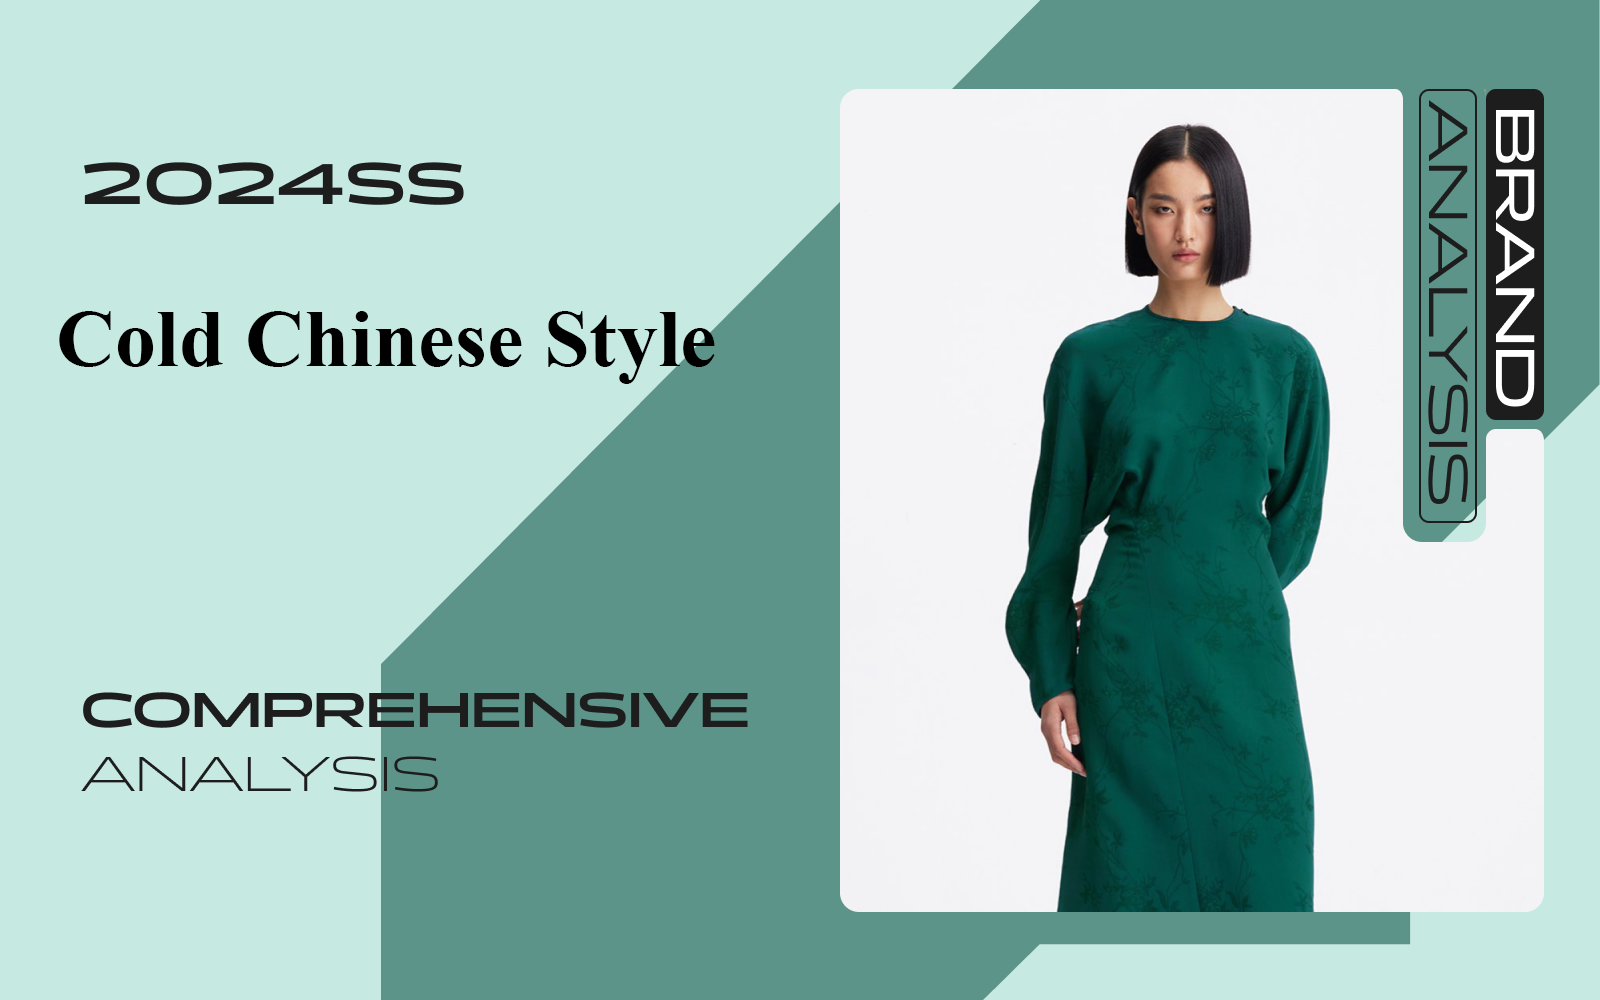 Cold Chinese Style -- The Comprehensive Analysis of Womenswear Designer Brand